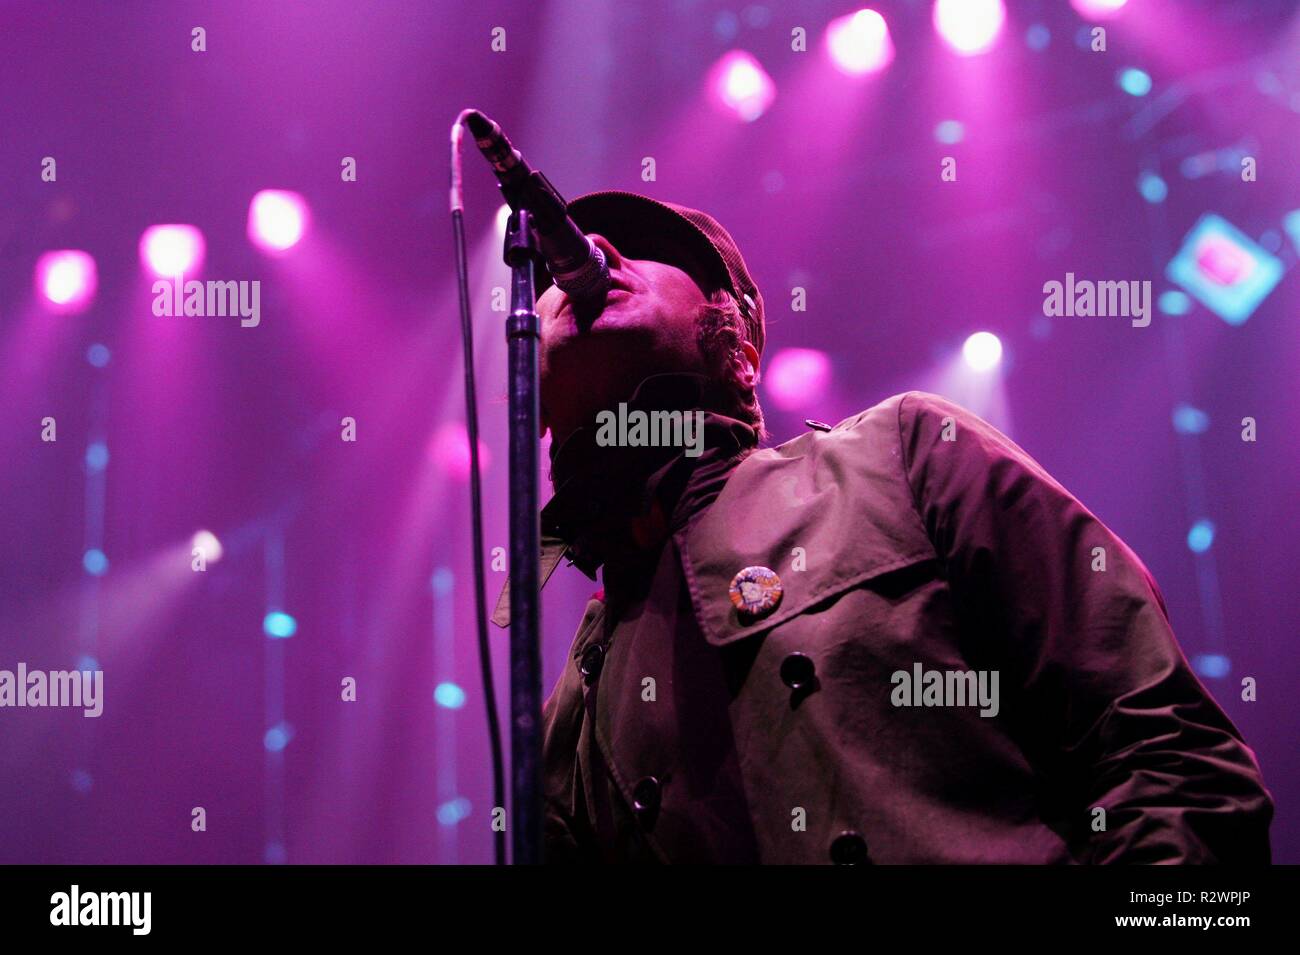 LIAM GALLAGHER OASIS 20 octobre 2005 CTS Allstar61891/Cinetext/Hambourg Banque D'Images